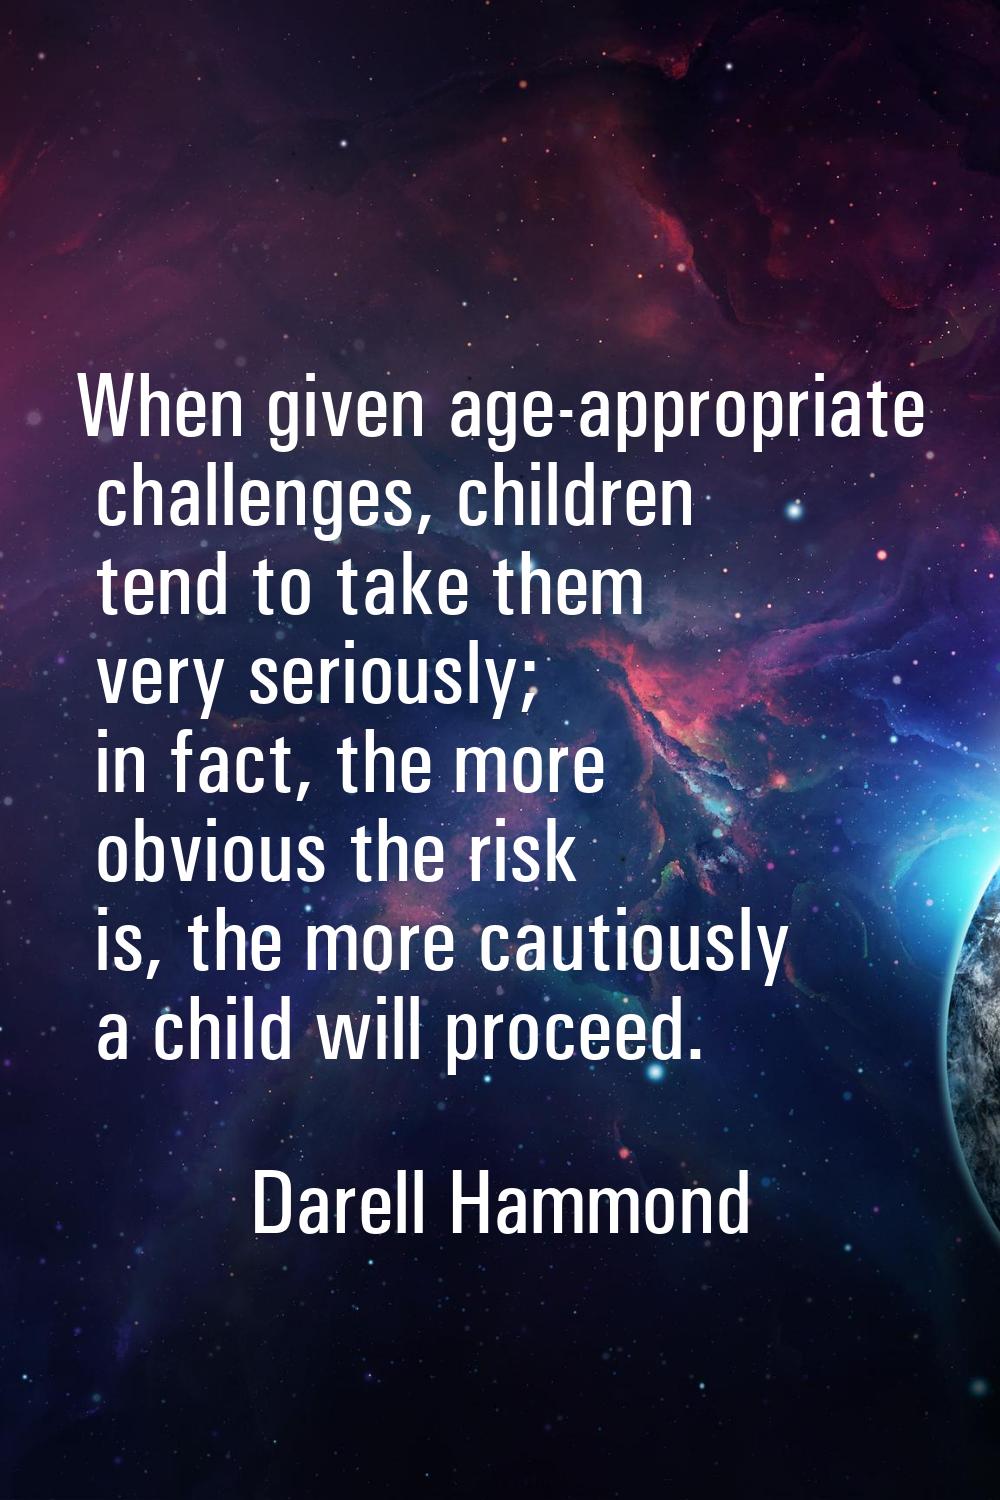 When given age-appropriate challenges, children tend to take them very seriously; in fact, the more